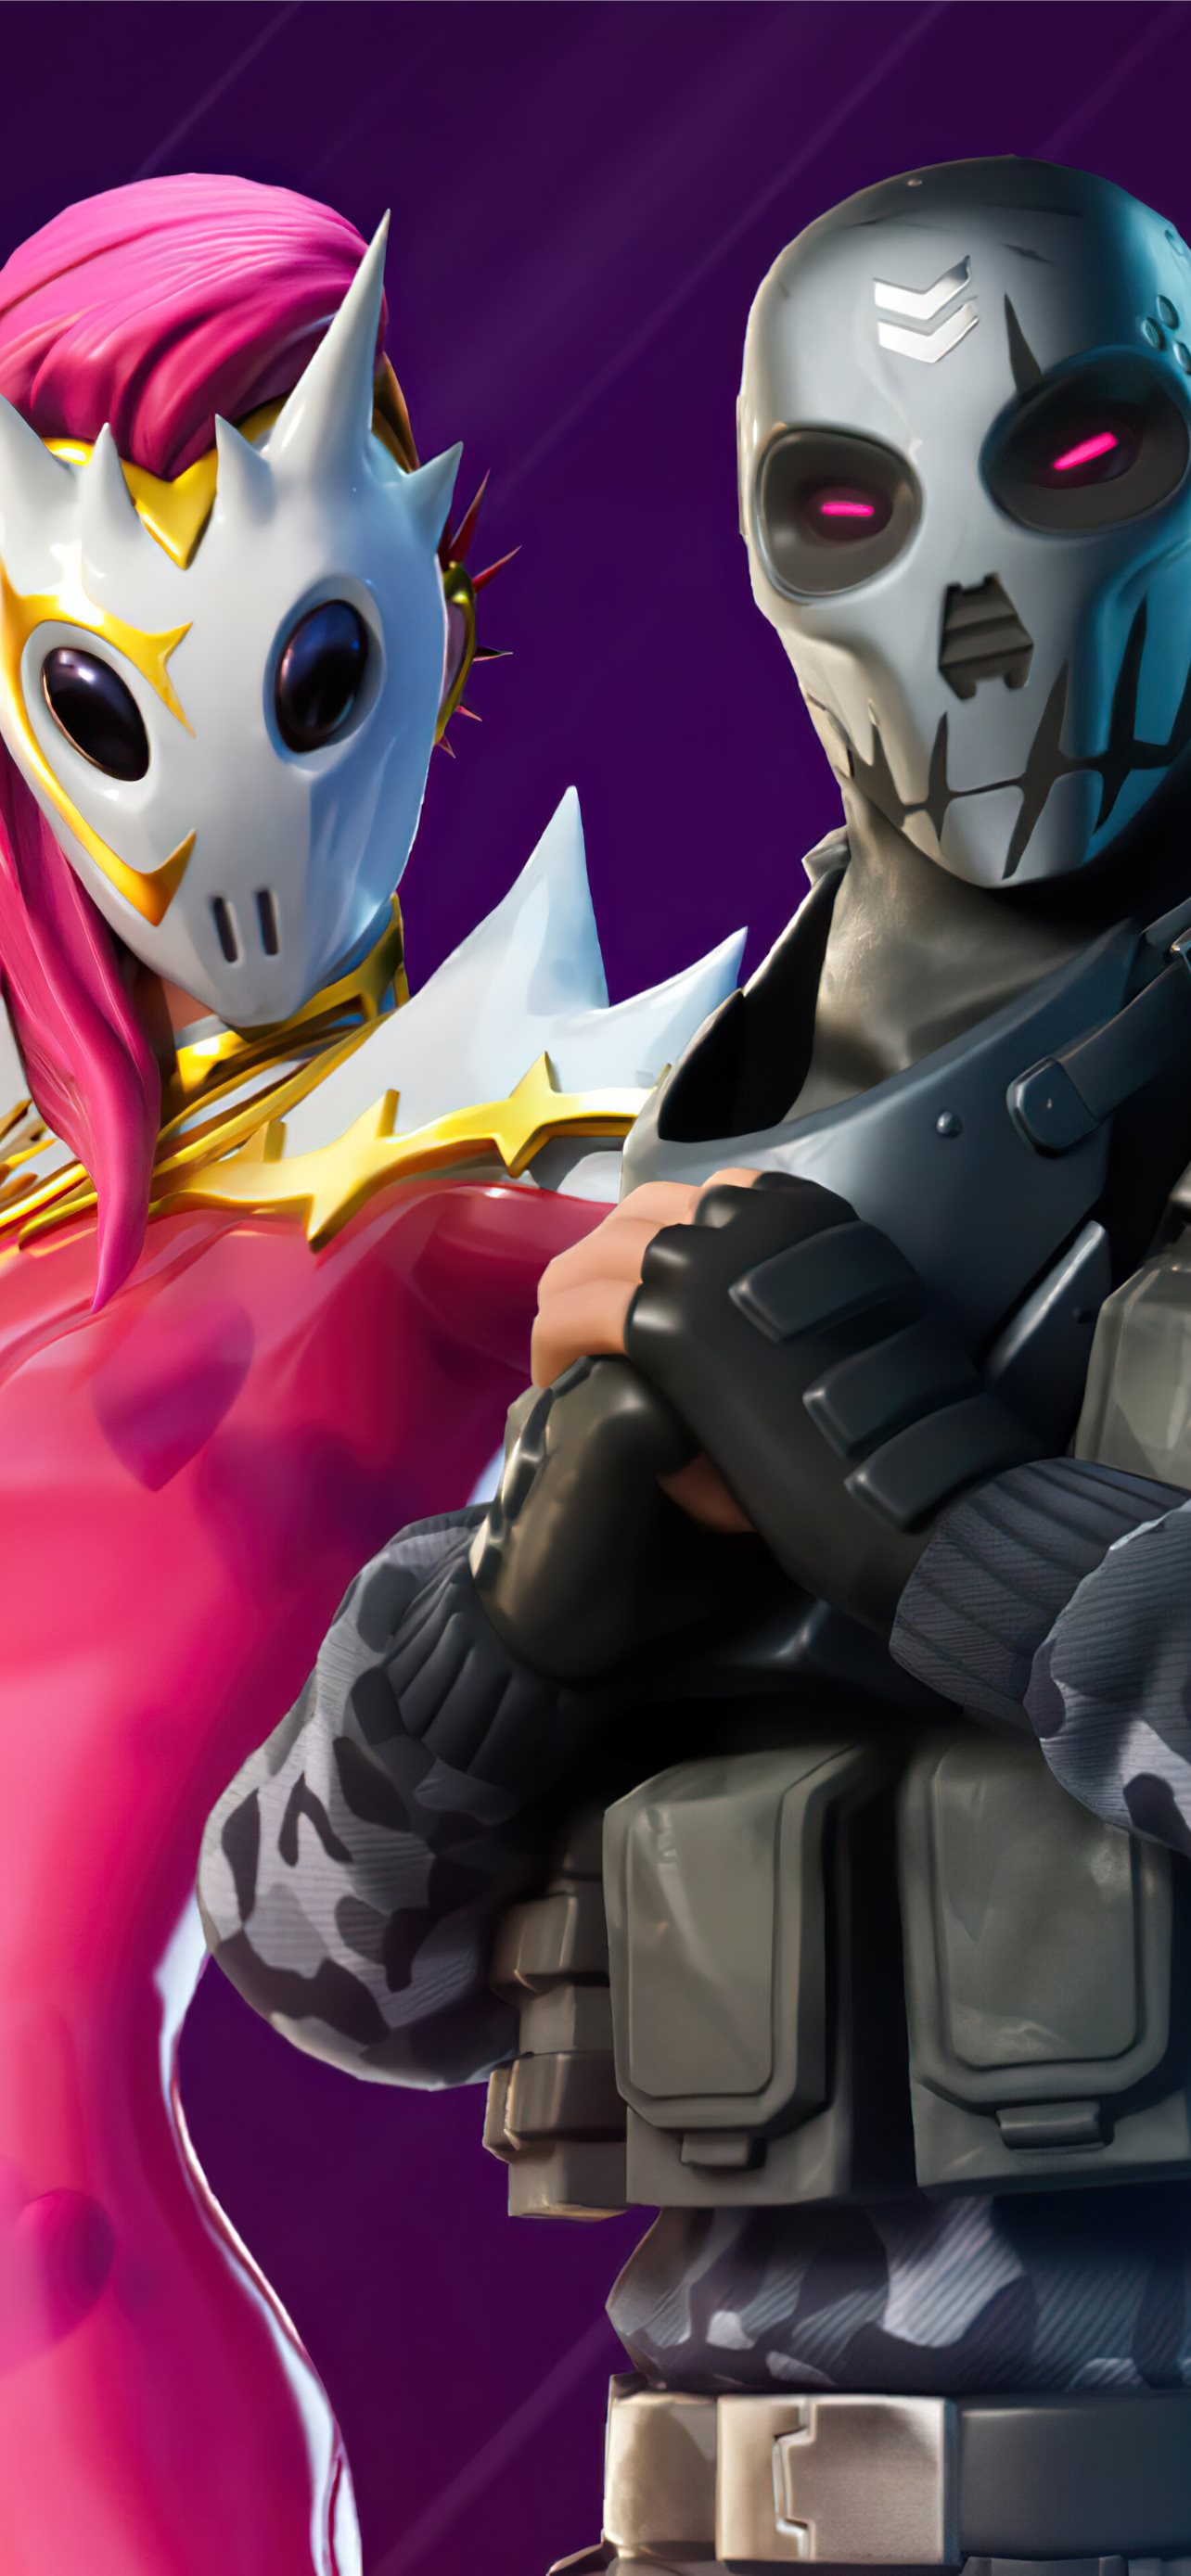 Malice Fortnite Wallpapers